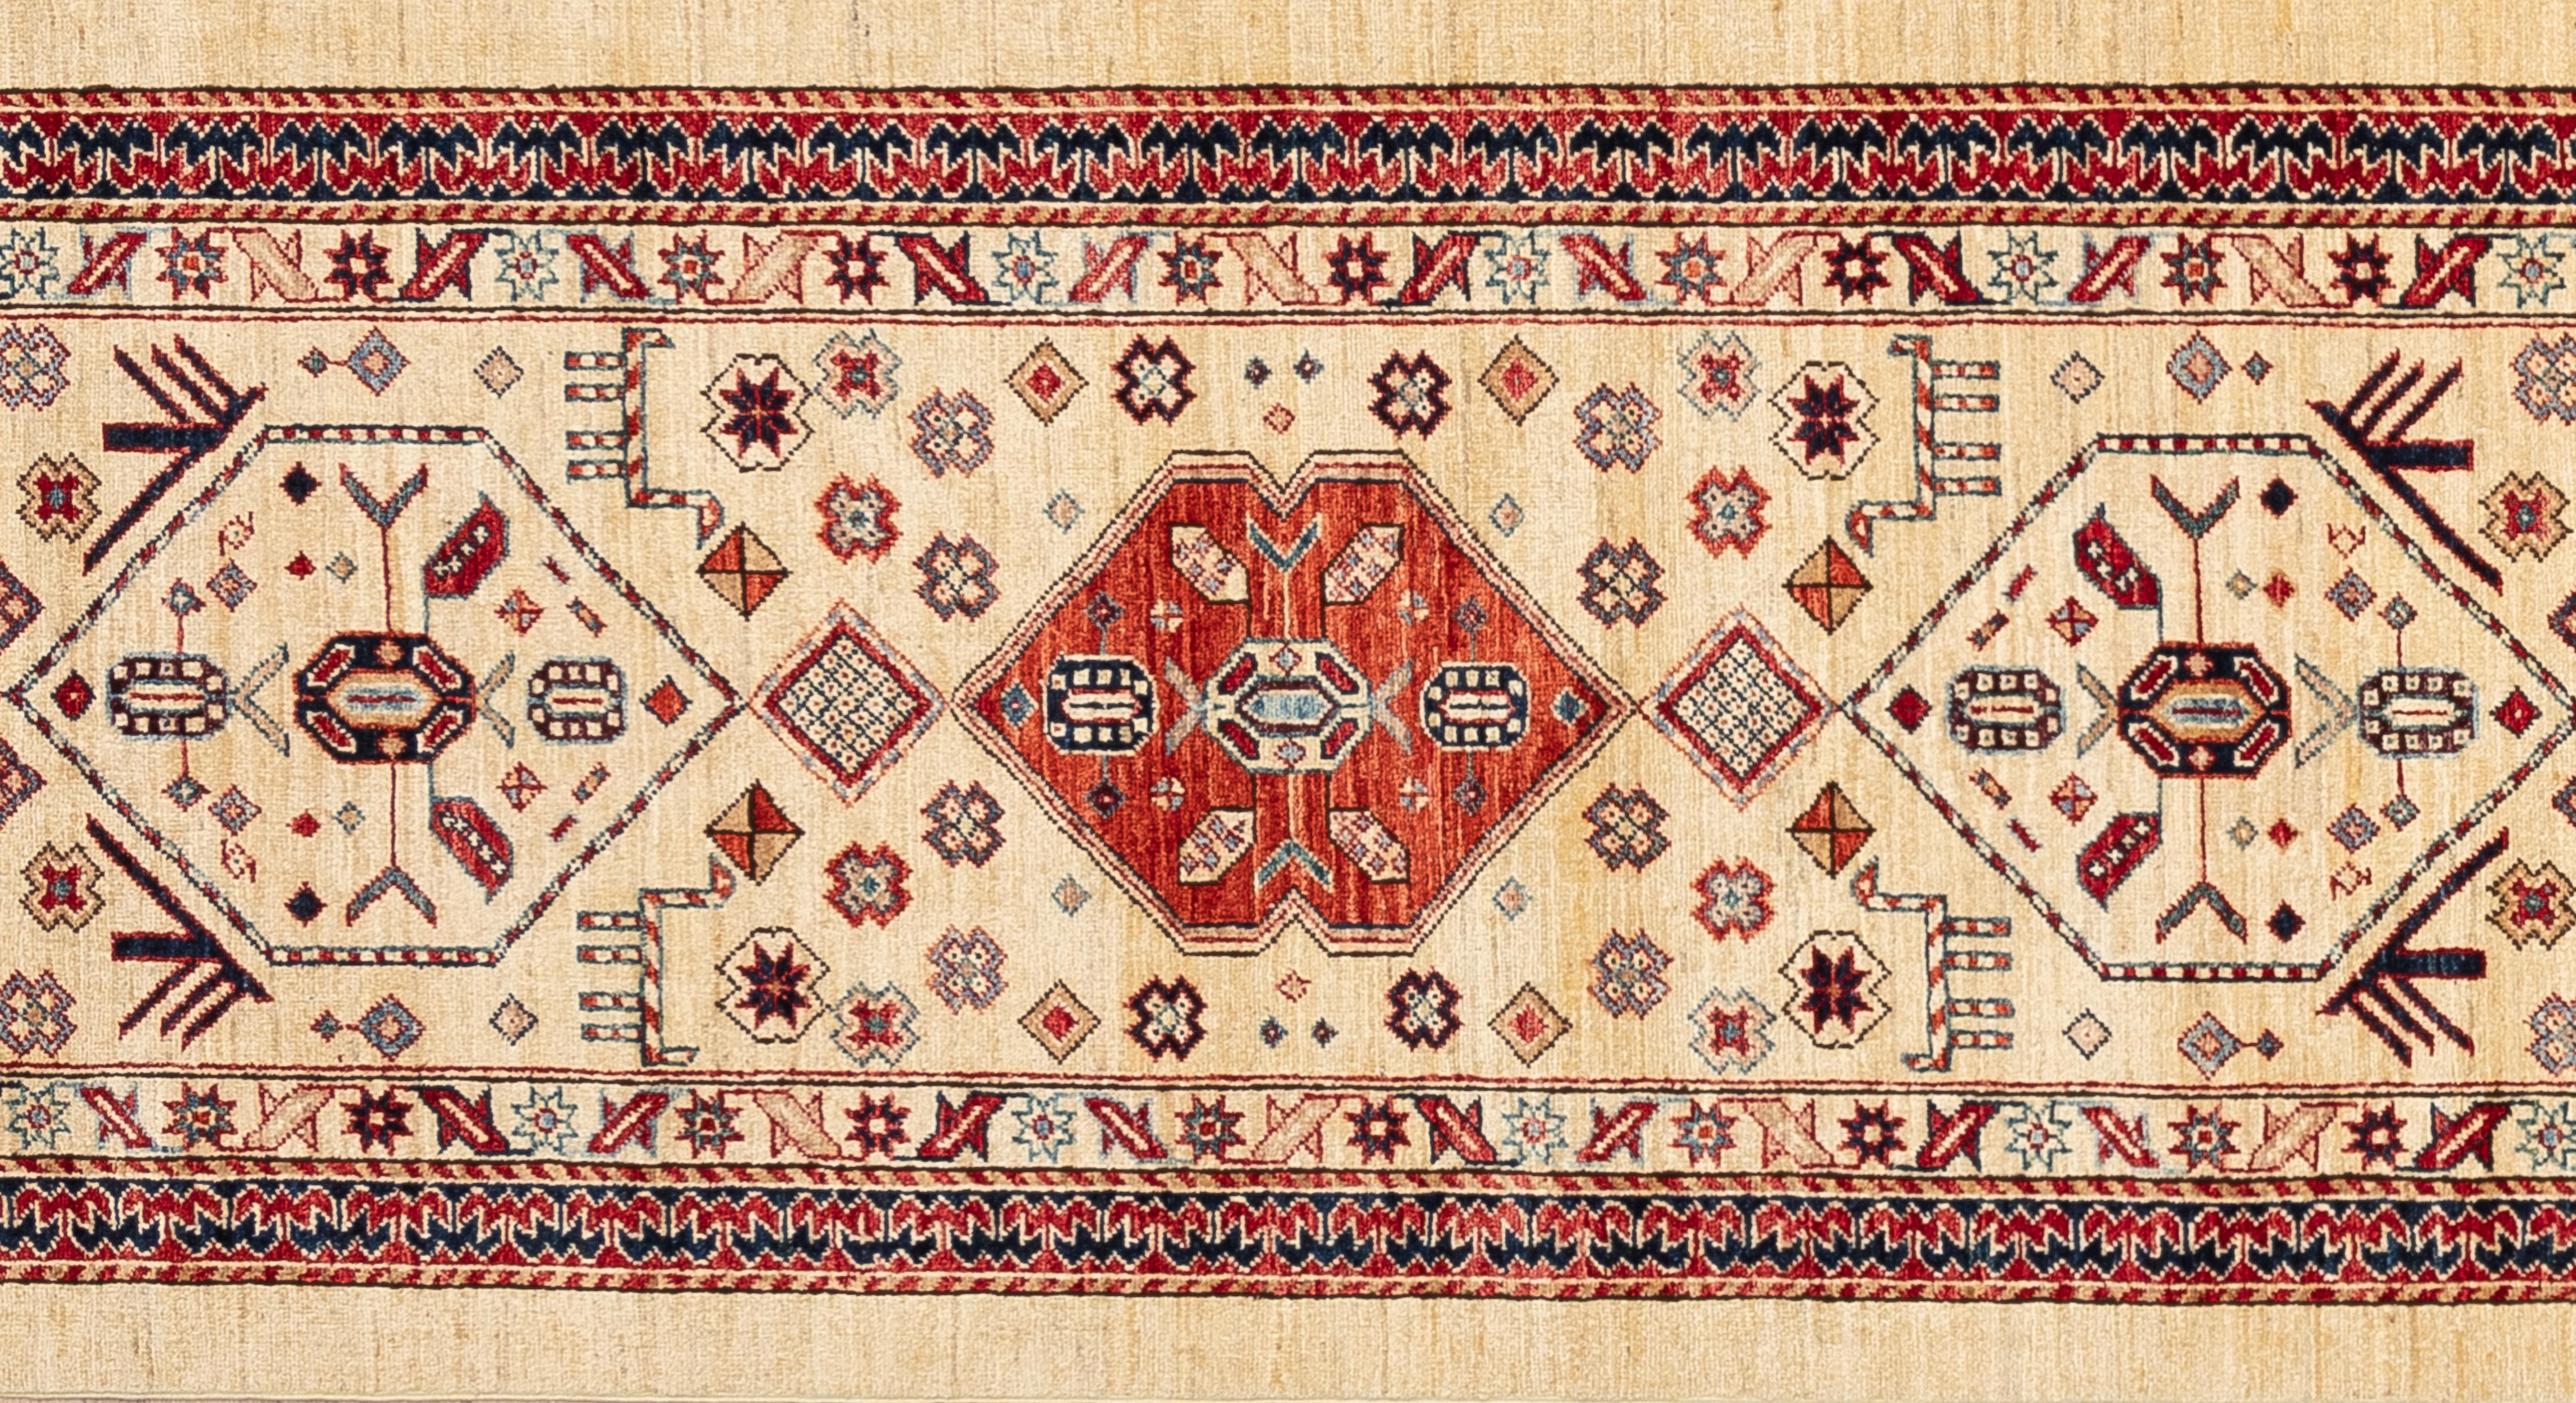 Handwoven with 100% handspun wool, this light and bright Kazak rug is inspired by Caucasian carpets. Its all over tribal design in unique coloring of cranberry and deep mahogany makes this rug a must have. 

Size - 3'1